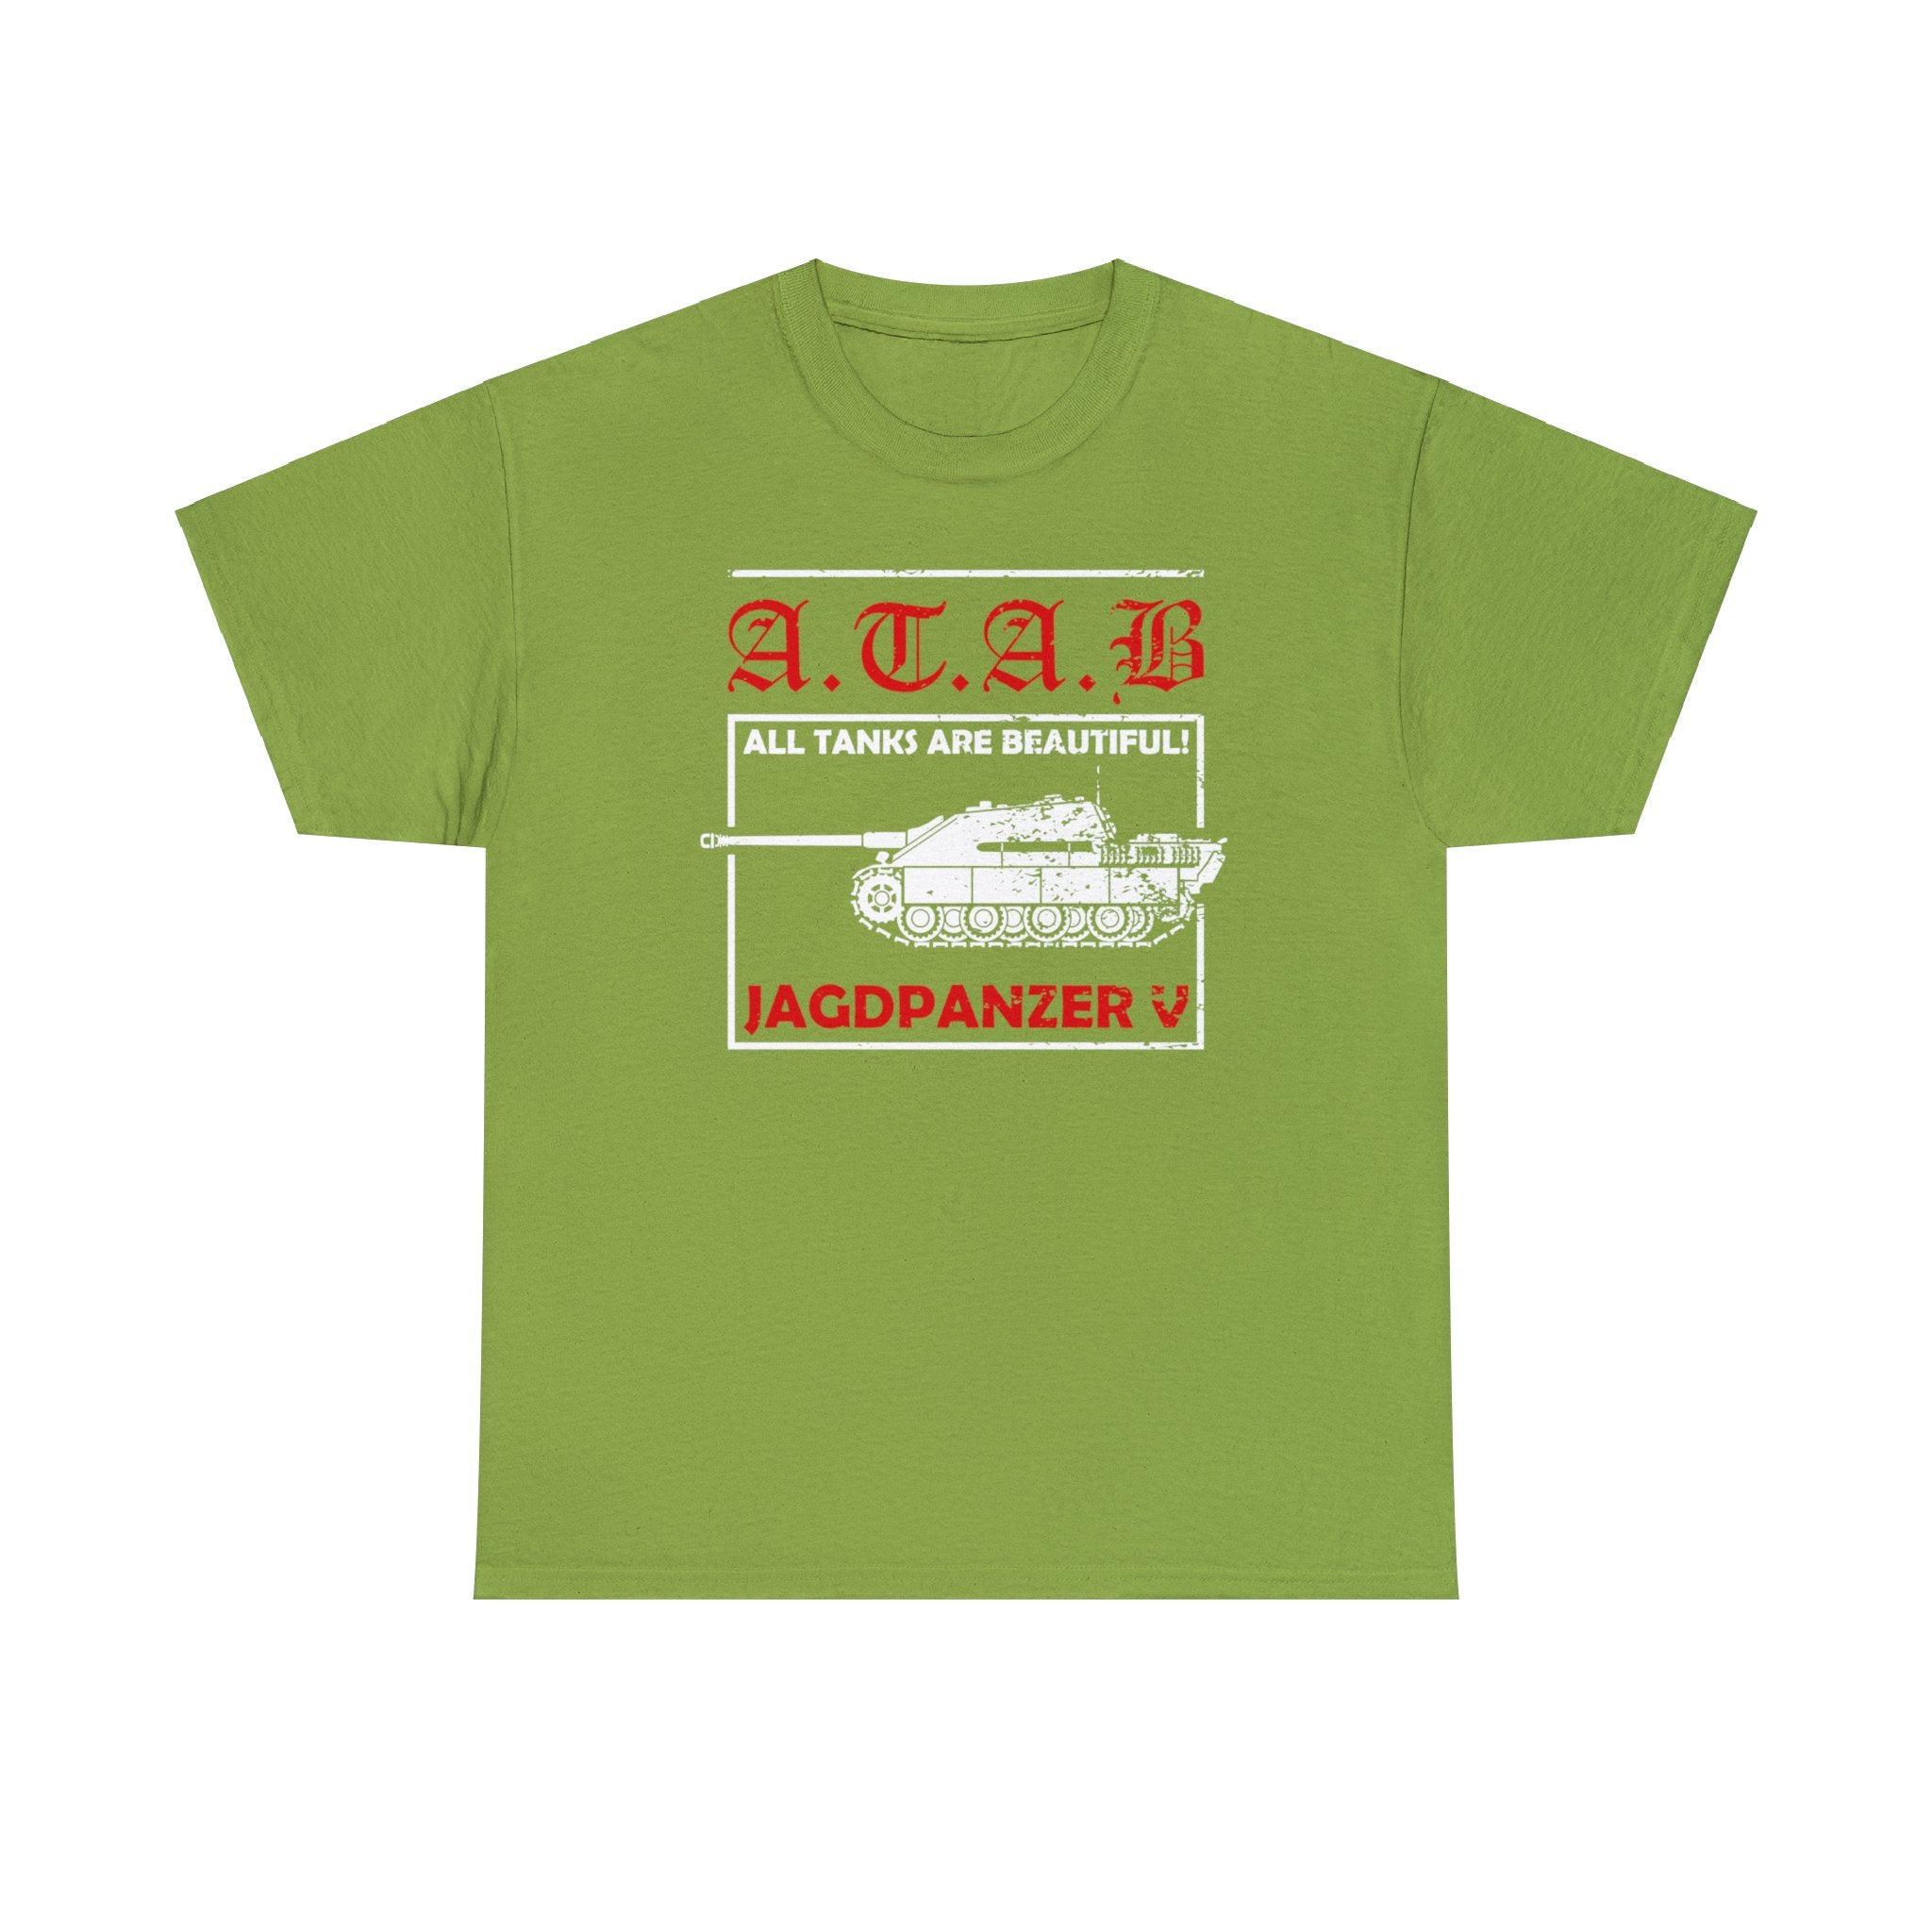 A.T.A.B - All tanks are beautiful - T-Shirt